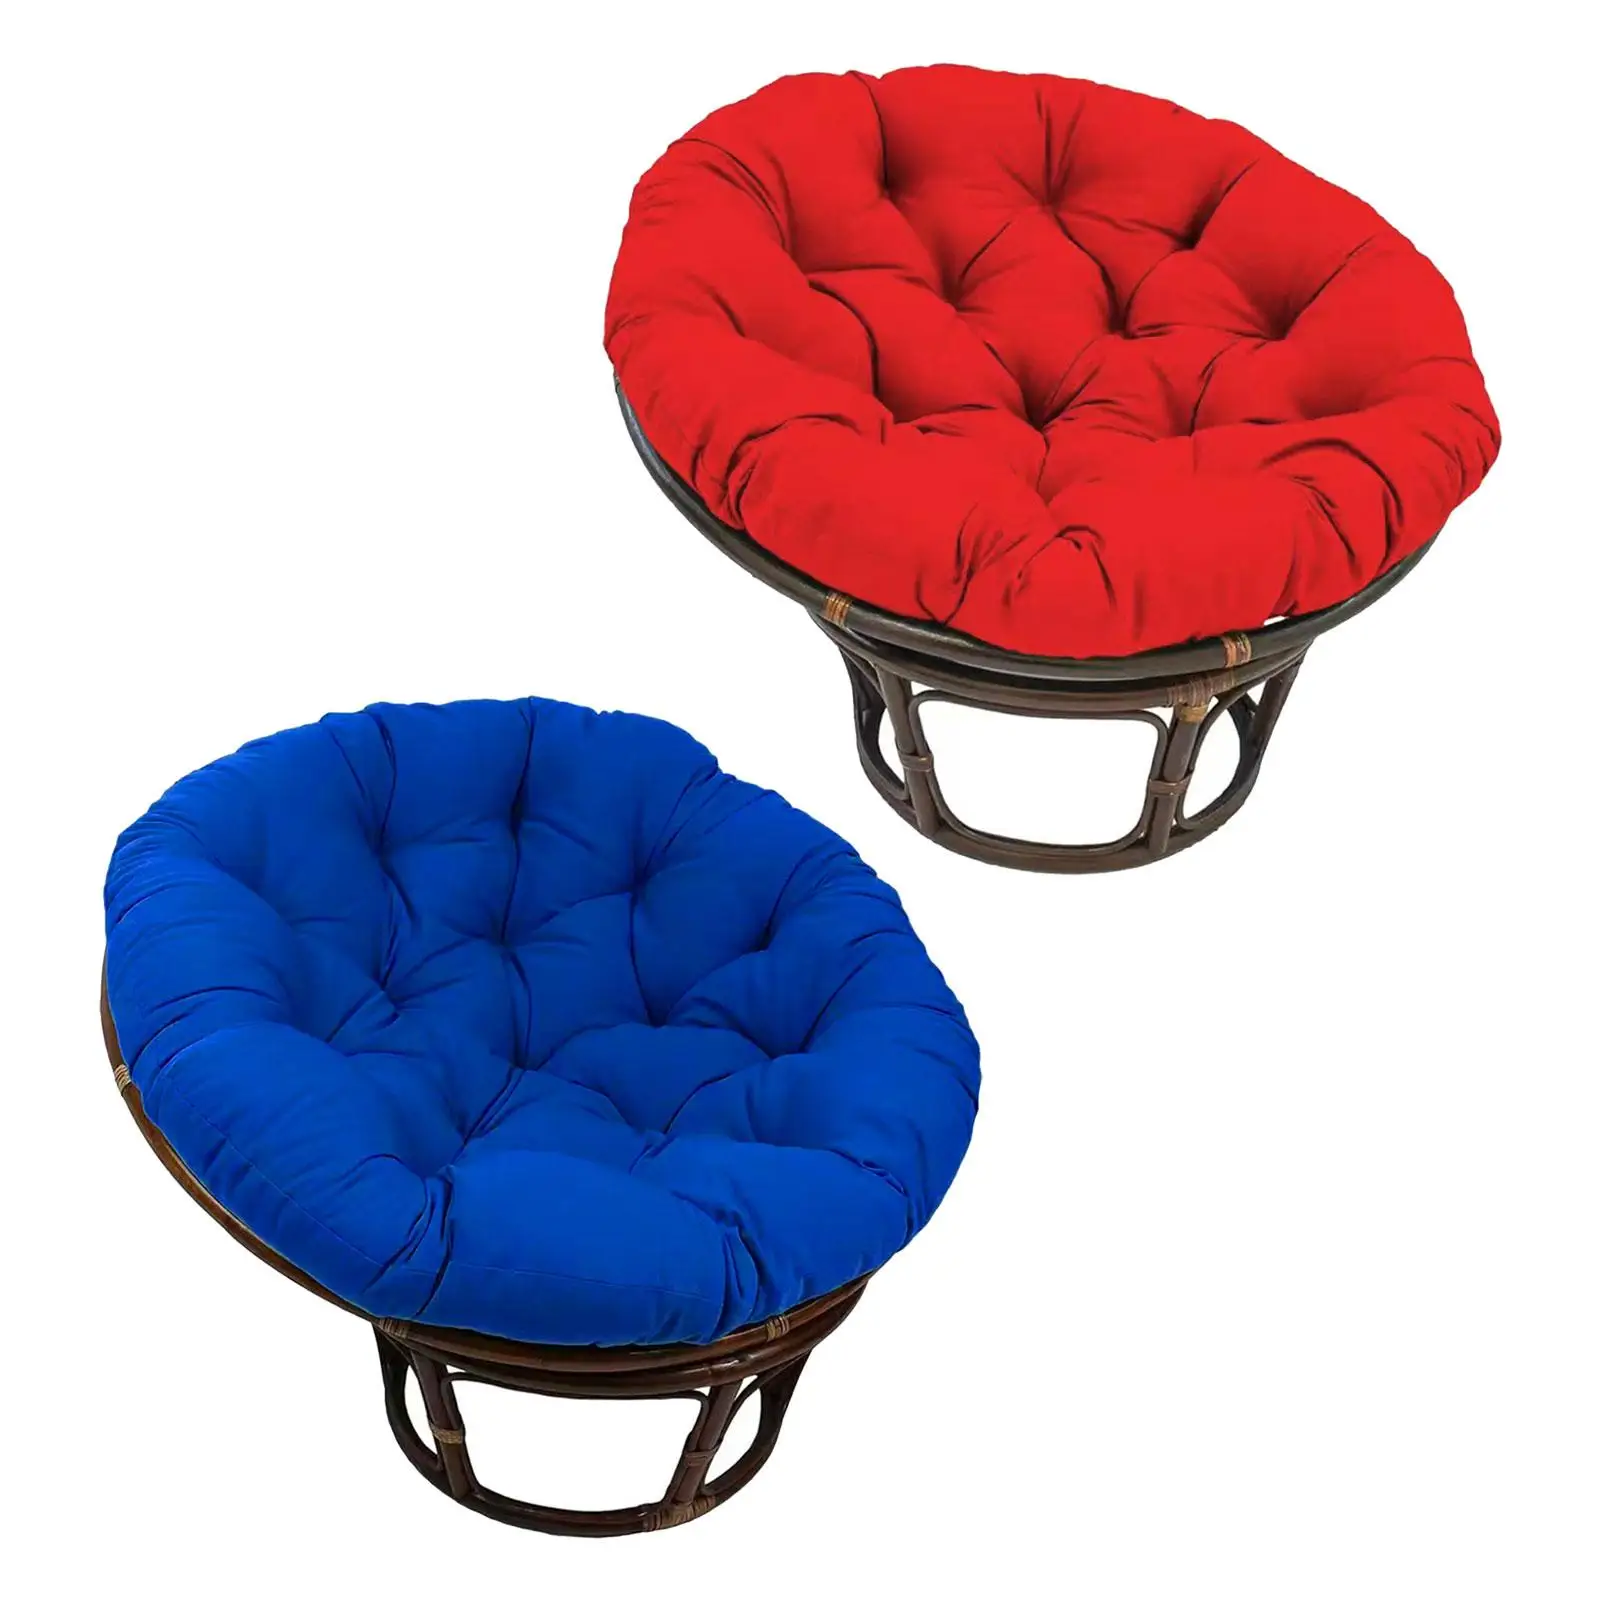 Egg Chair Cushion Replacement Egg Chair Swing Chair Pads for Indoor or Outdoor Swing Chairs Hammock Chair Garden Offices